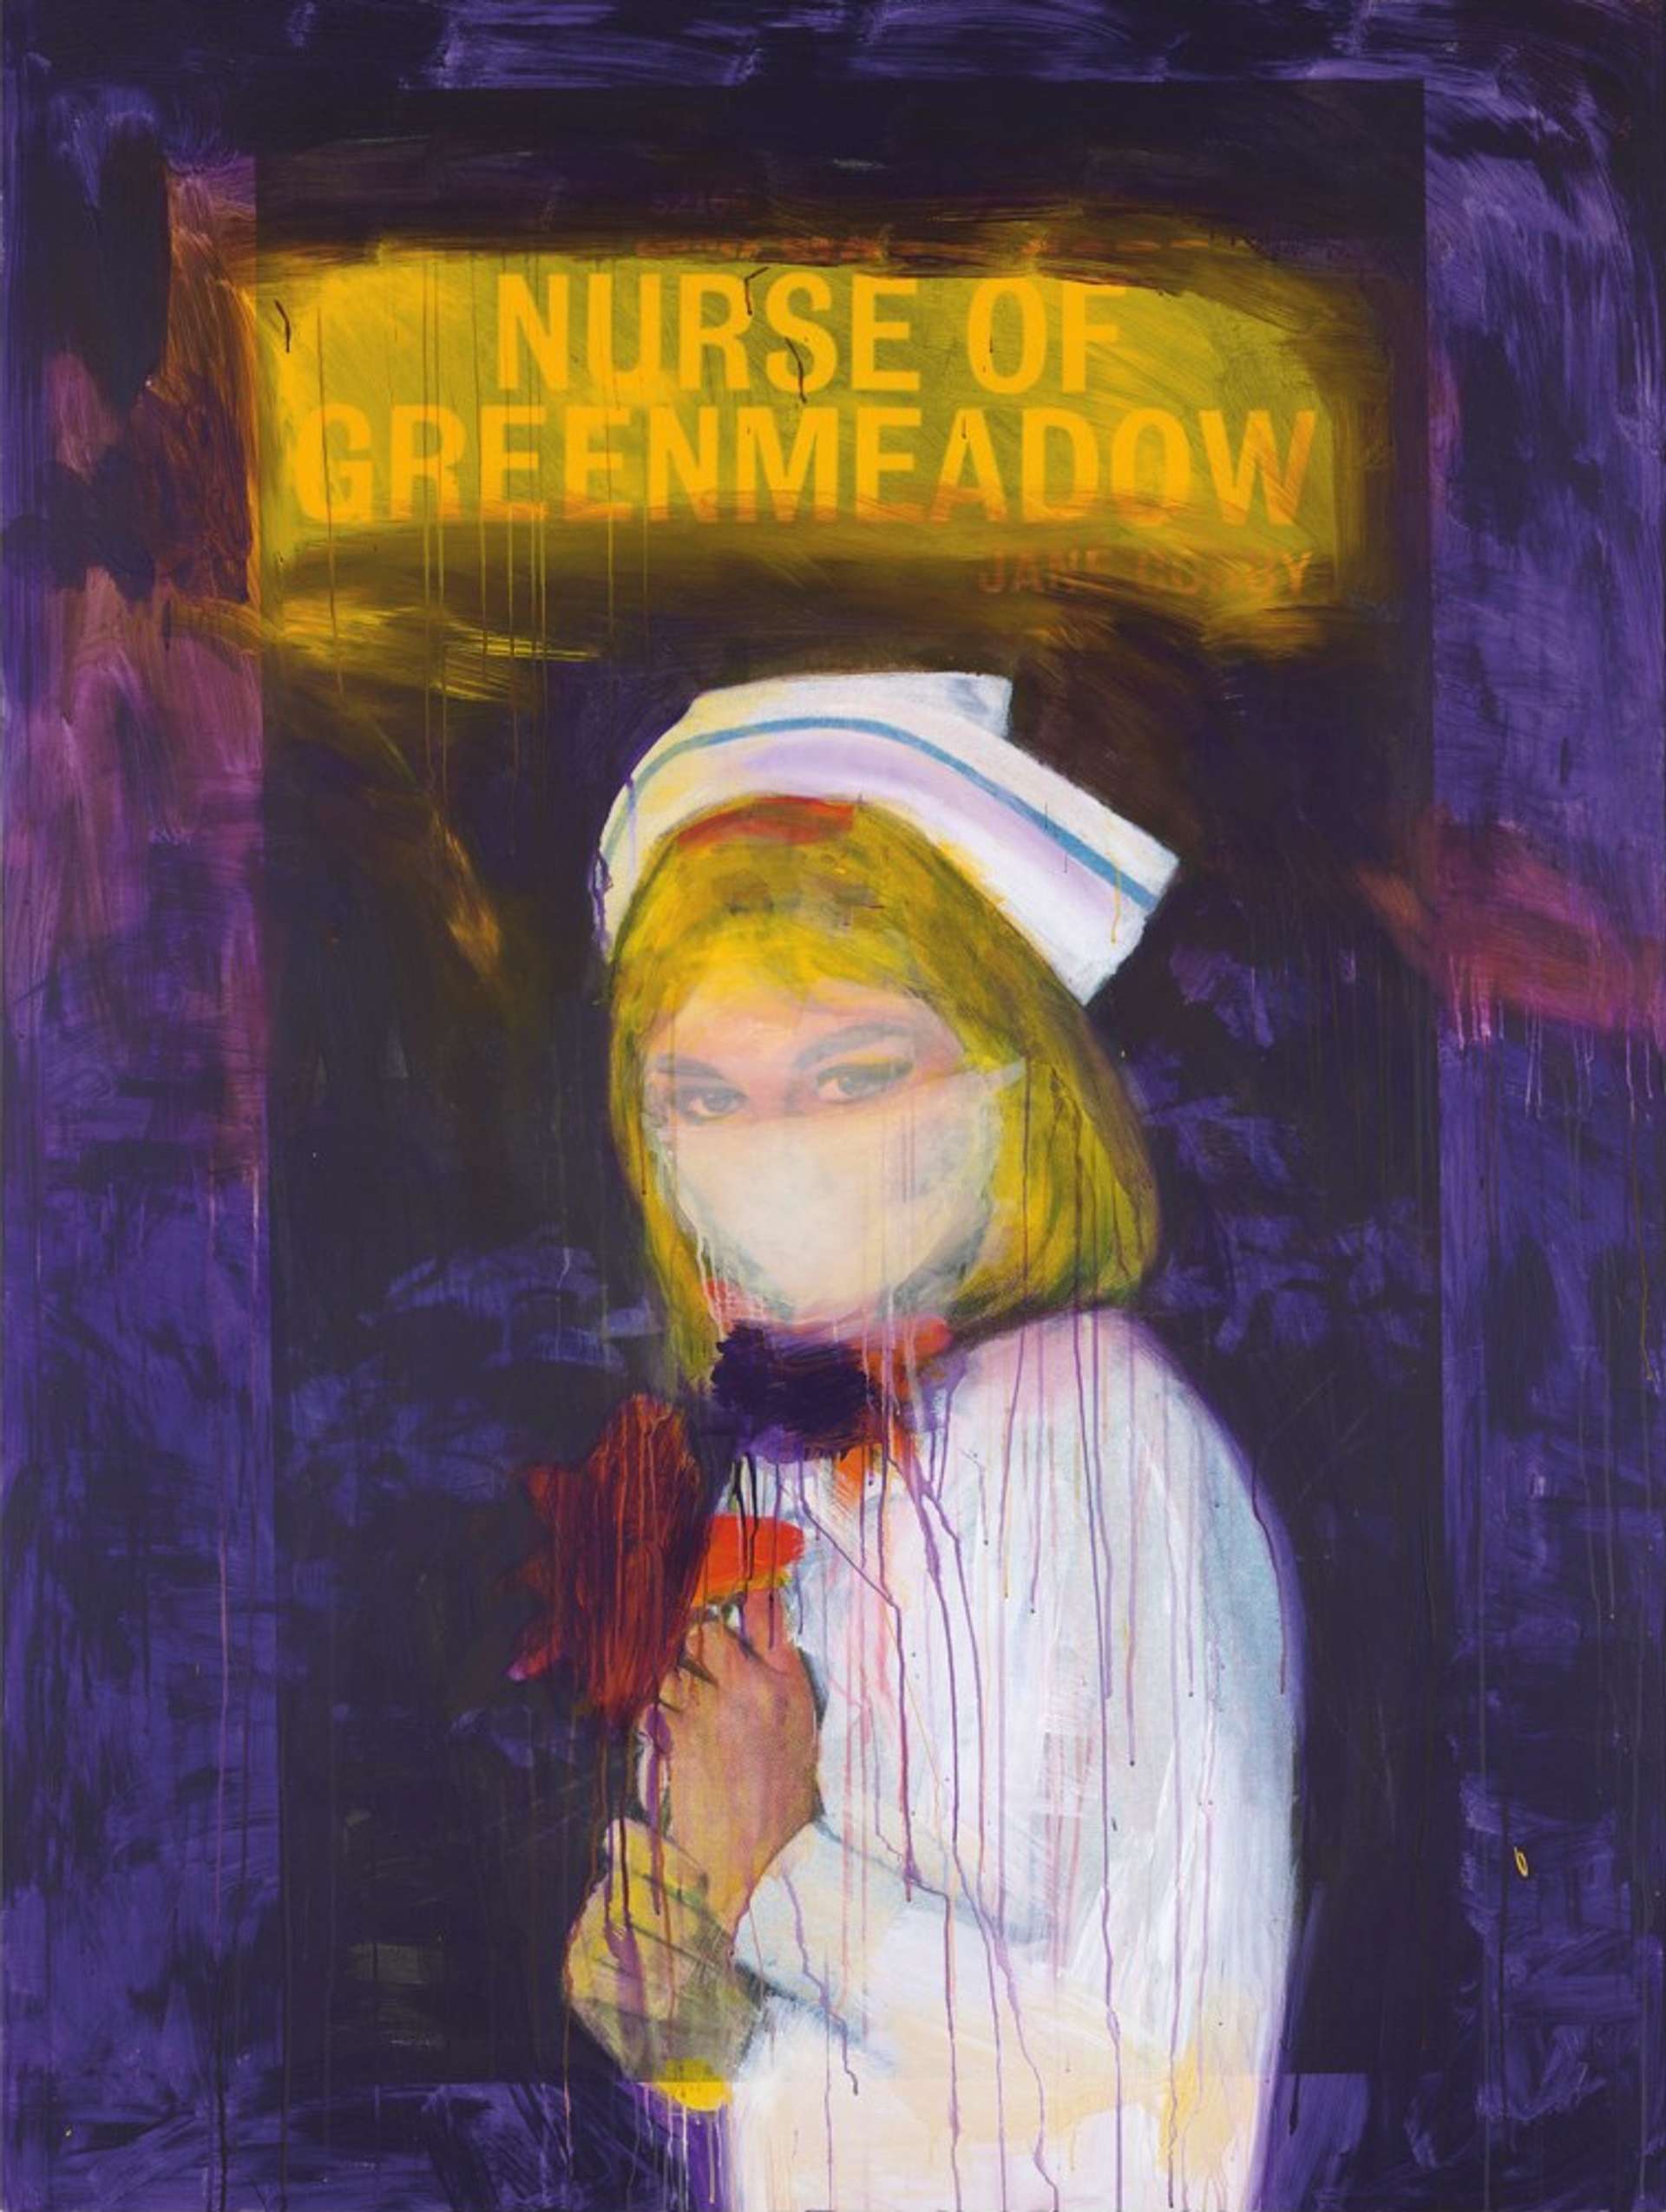 An image of the artwork Nurse Of Greenmeadow by Richard Prince. It shows a blonde female nurse, against a purple background. The painting’s title is written and highlighted in yellow above her.